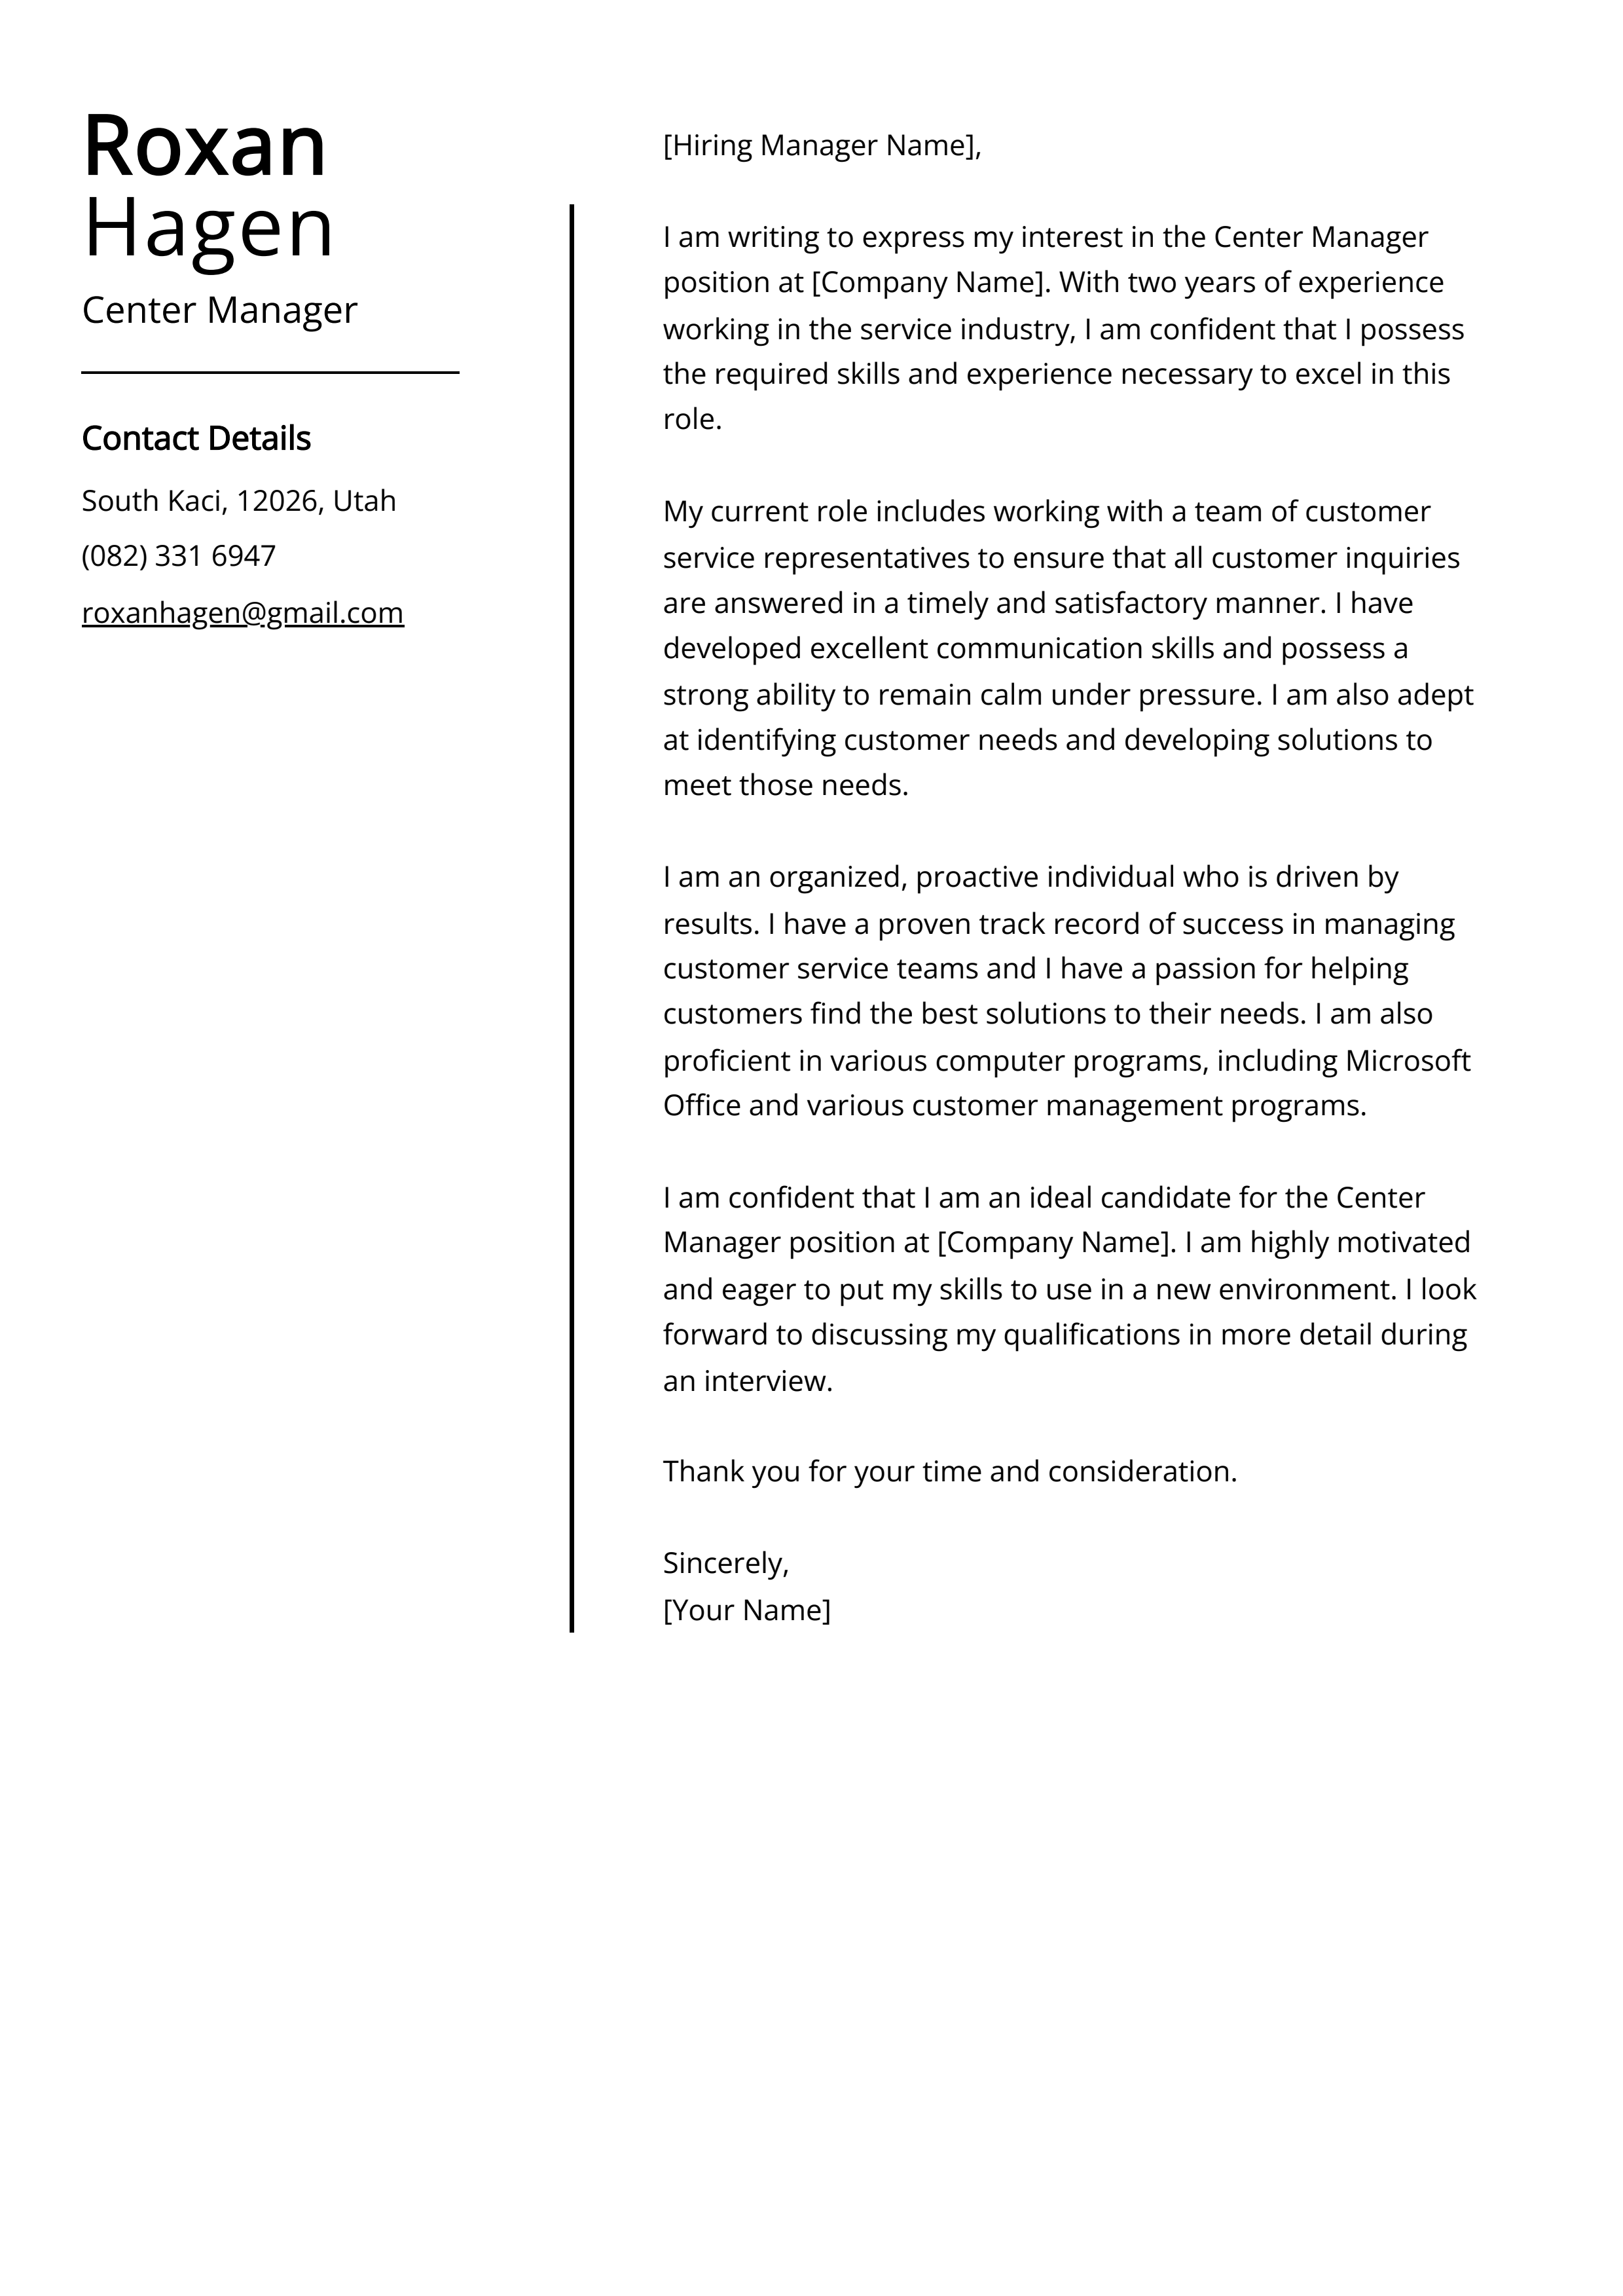 Center Manager Cover Letter Example